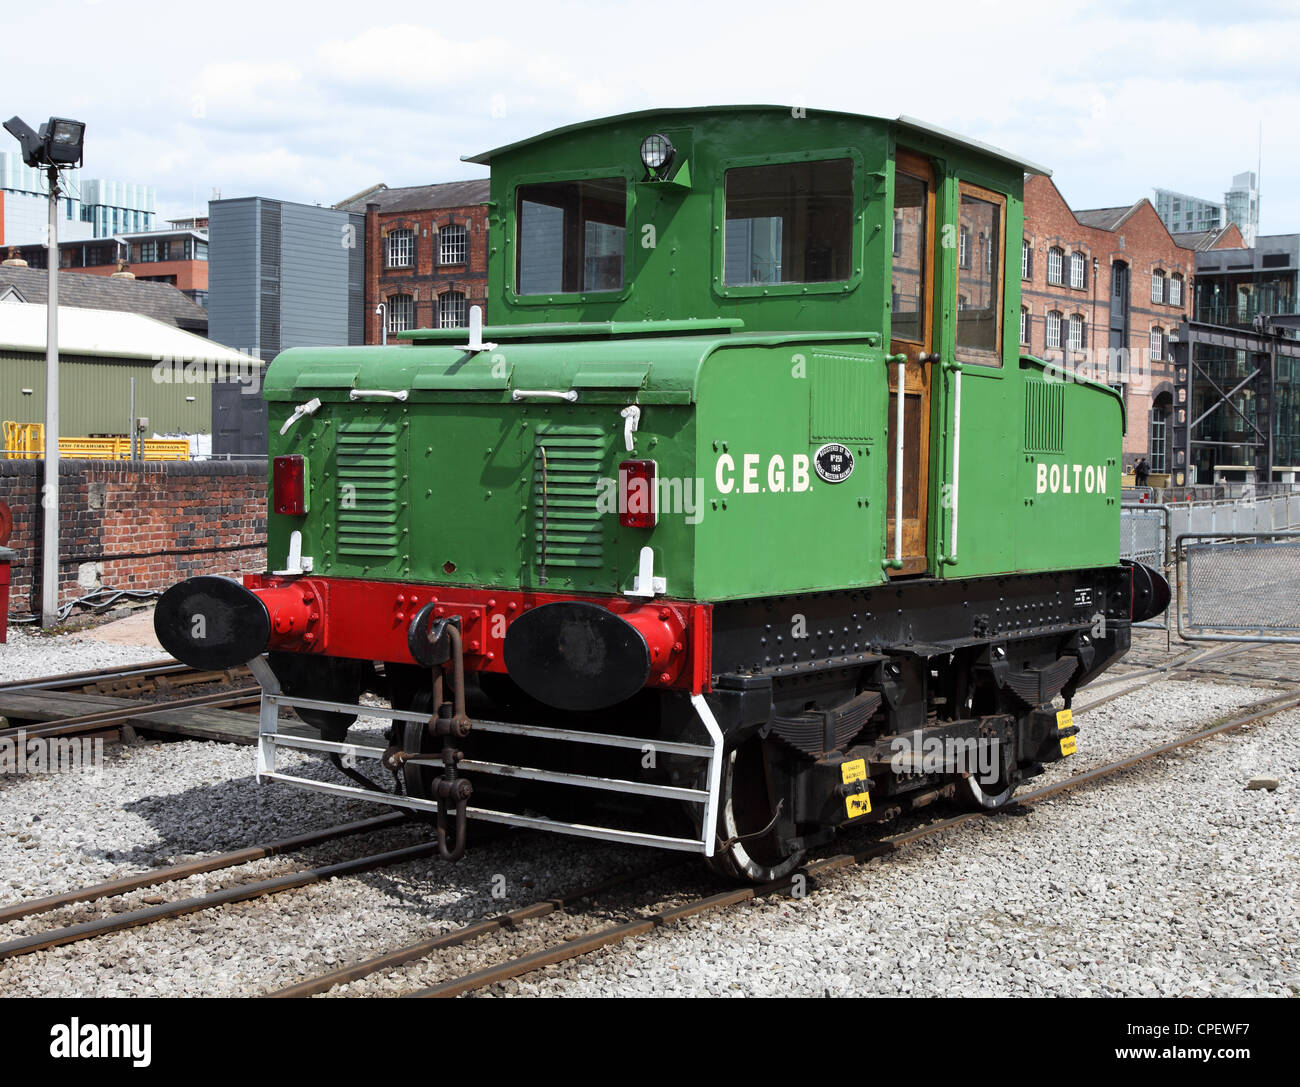 1944 English Electric battery locomotive used by the CEGB at Bolton, Manchester Museum of Science & Industry Stock Photo